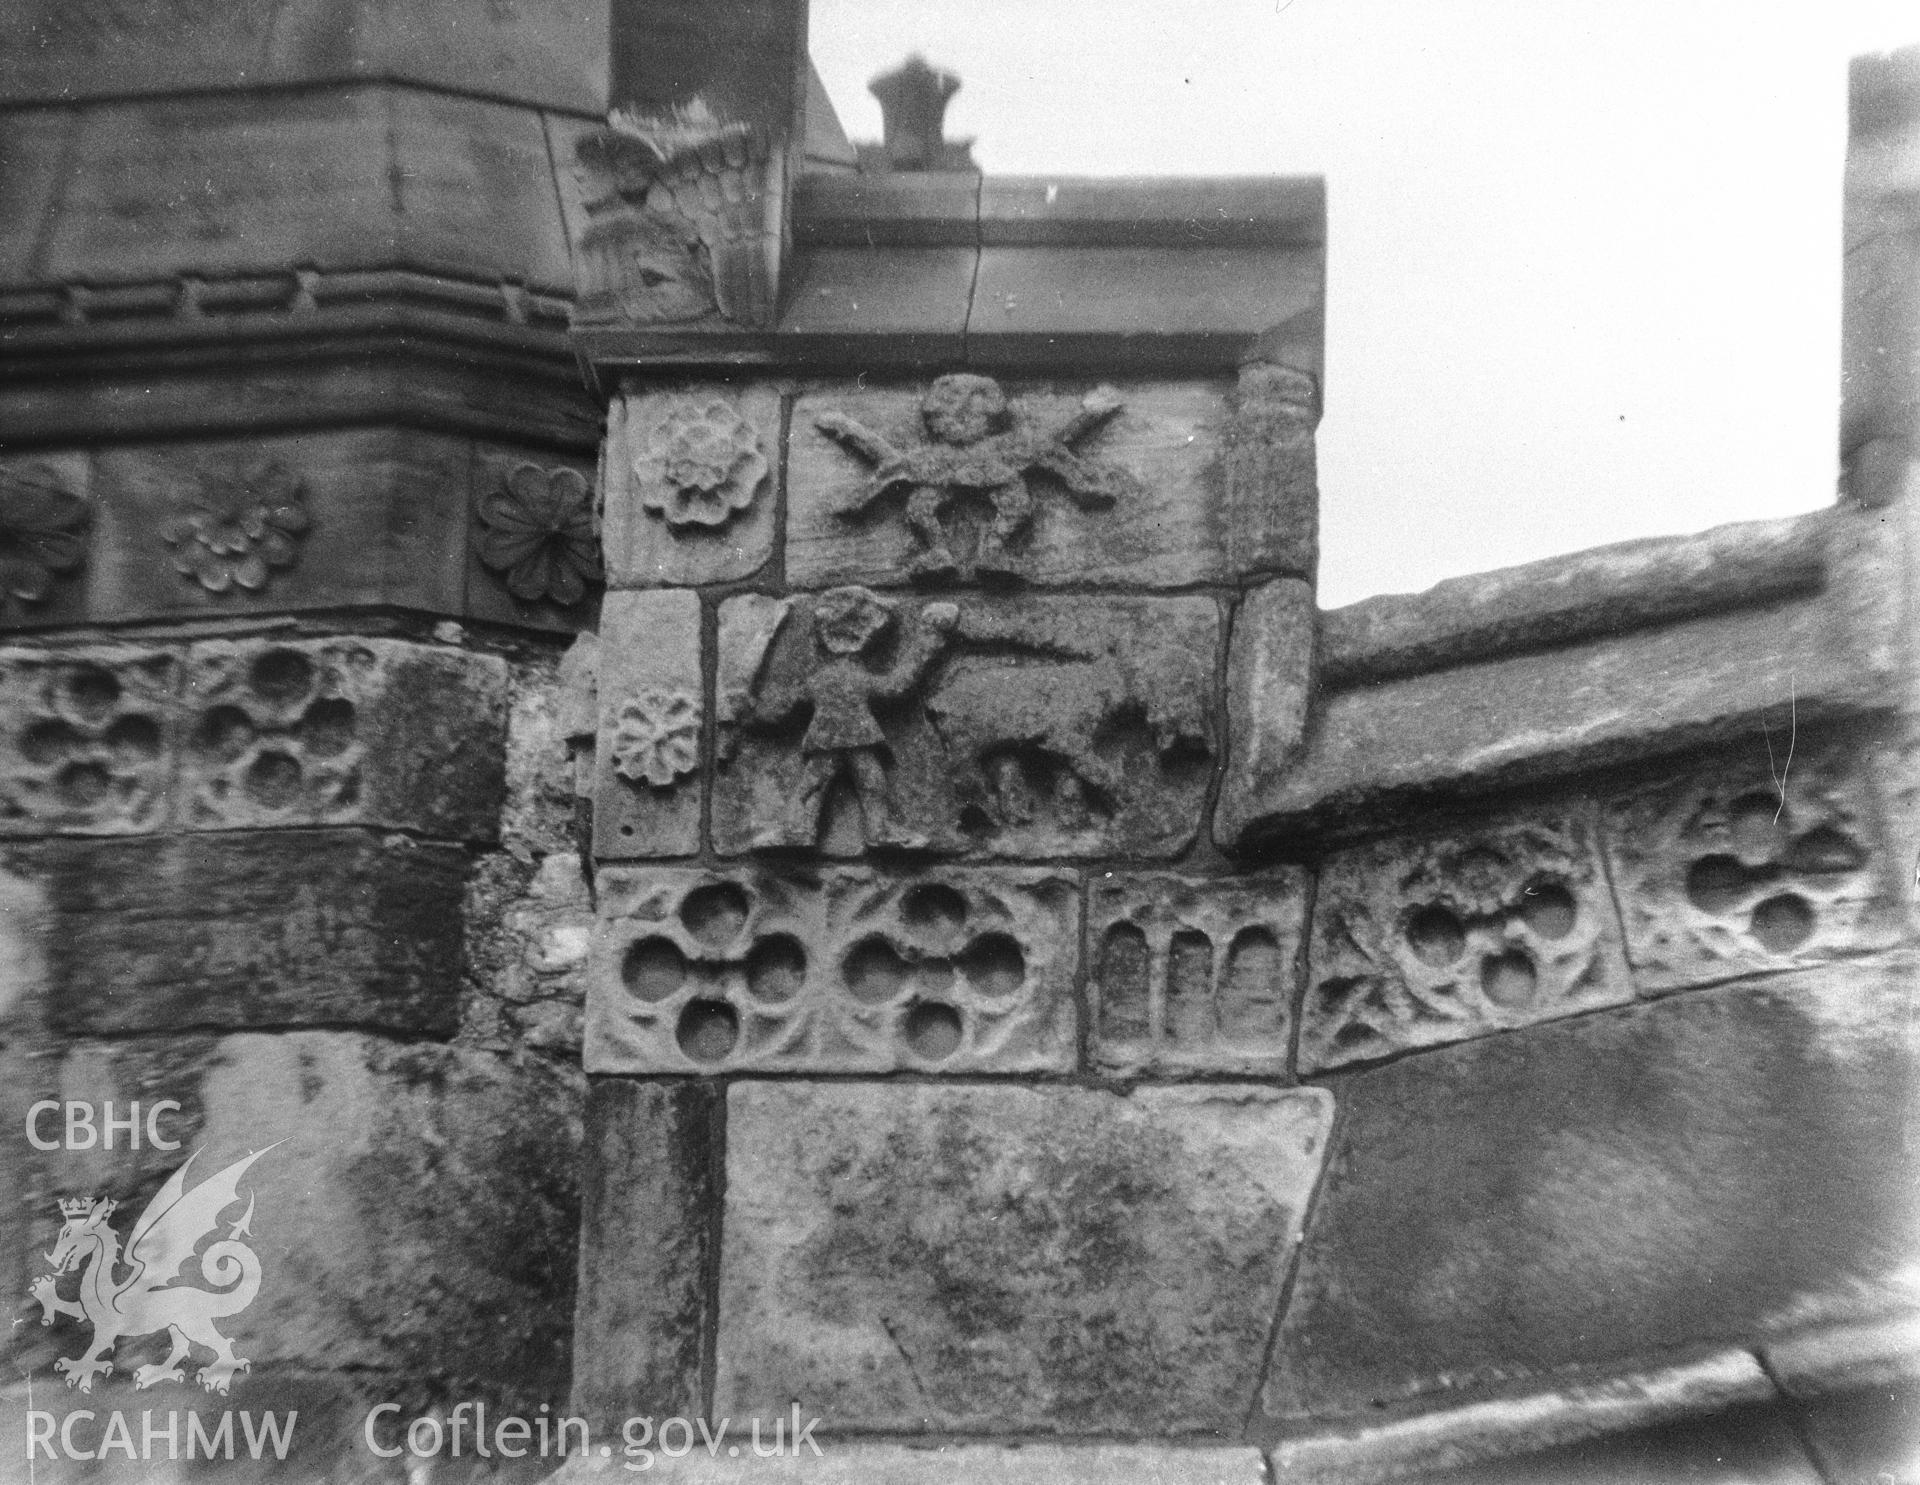 Digitised copy of a black and white negative showing exterior detail of the south transept of St Cybi's Church, produced by RCAHMW before 1960